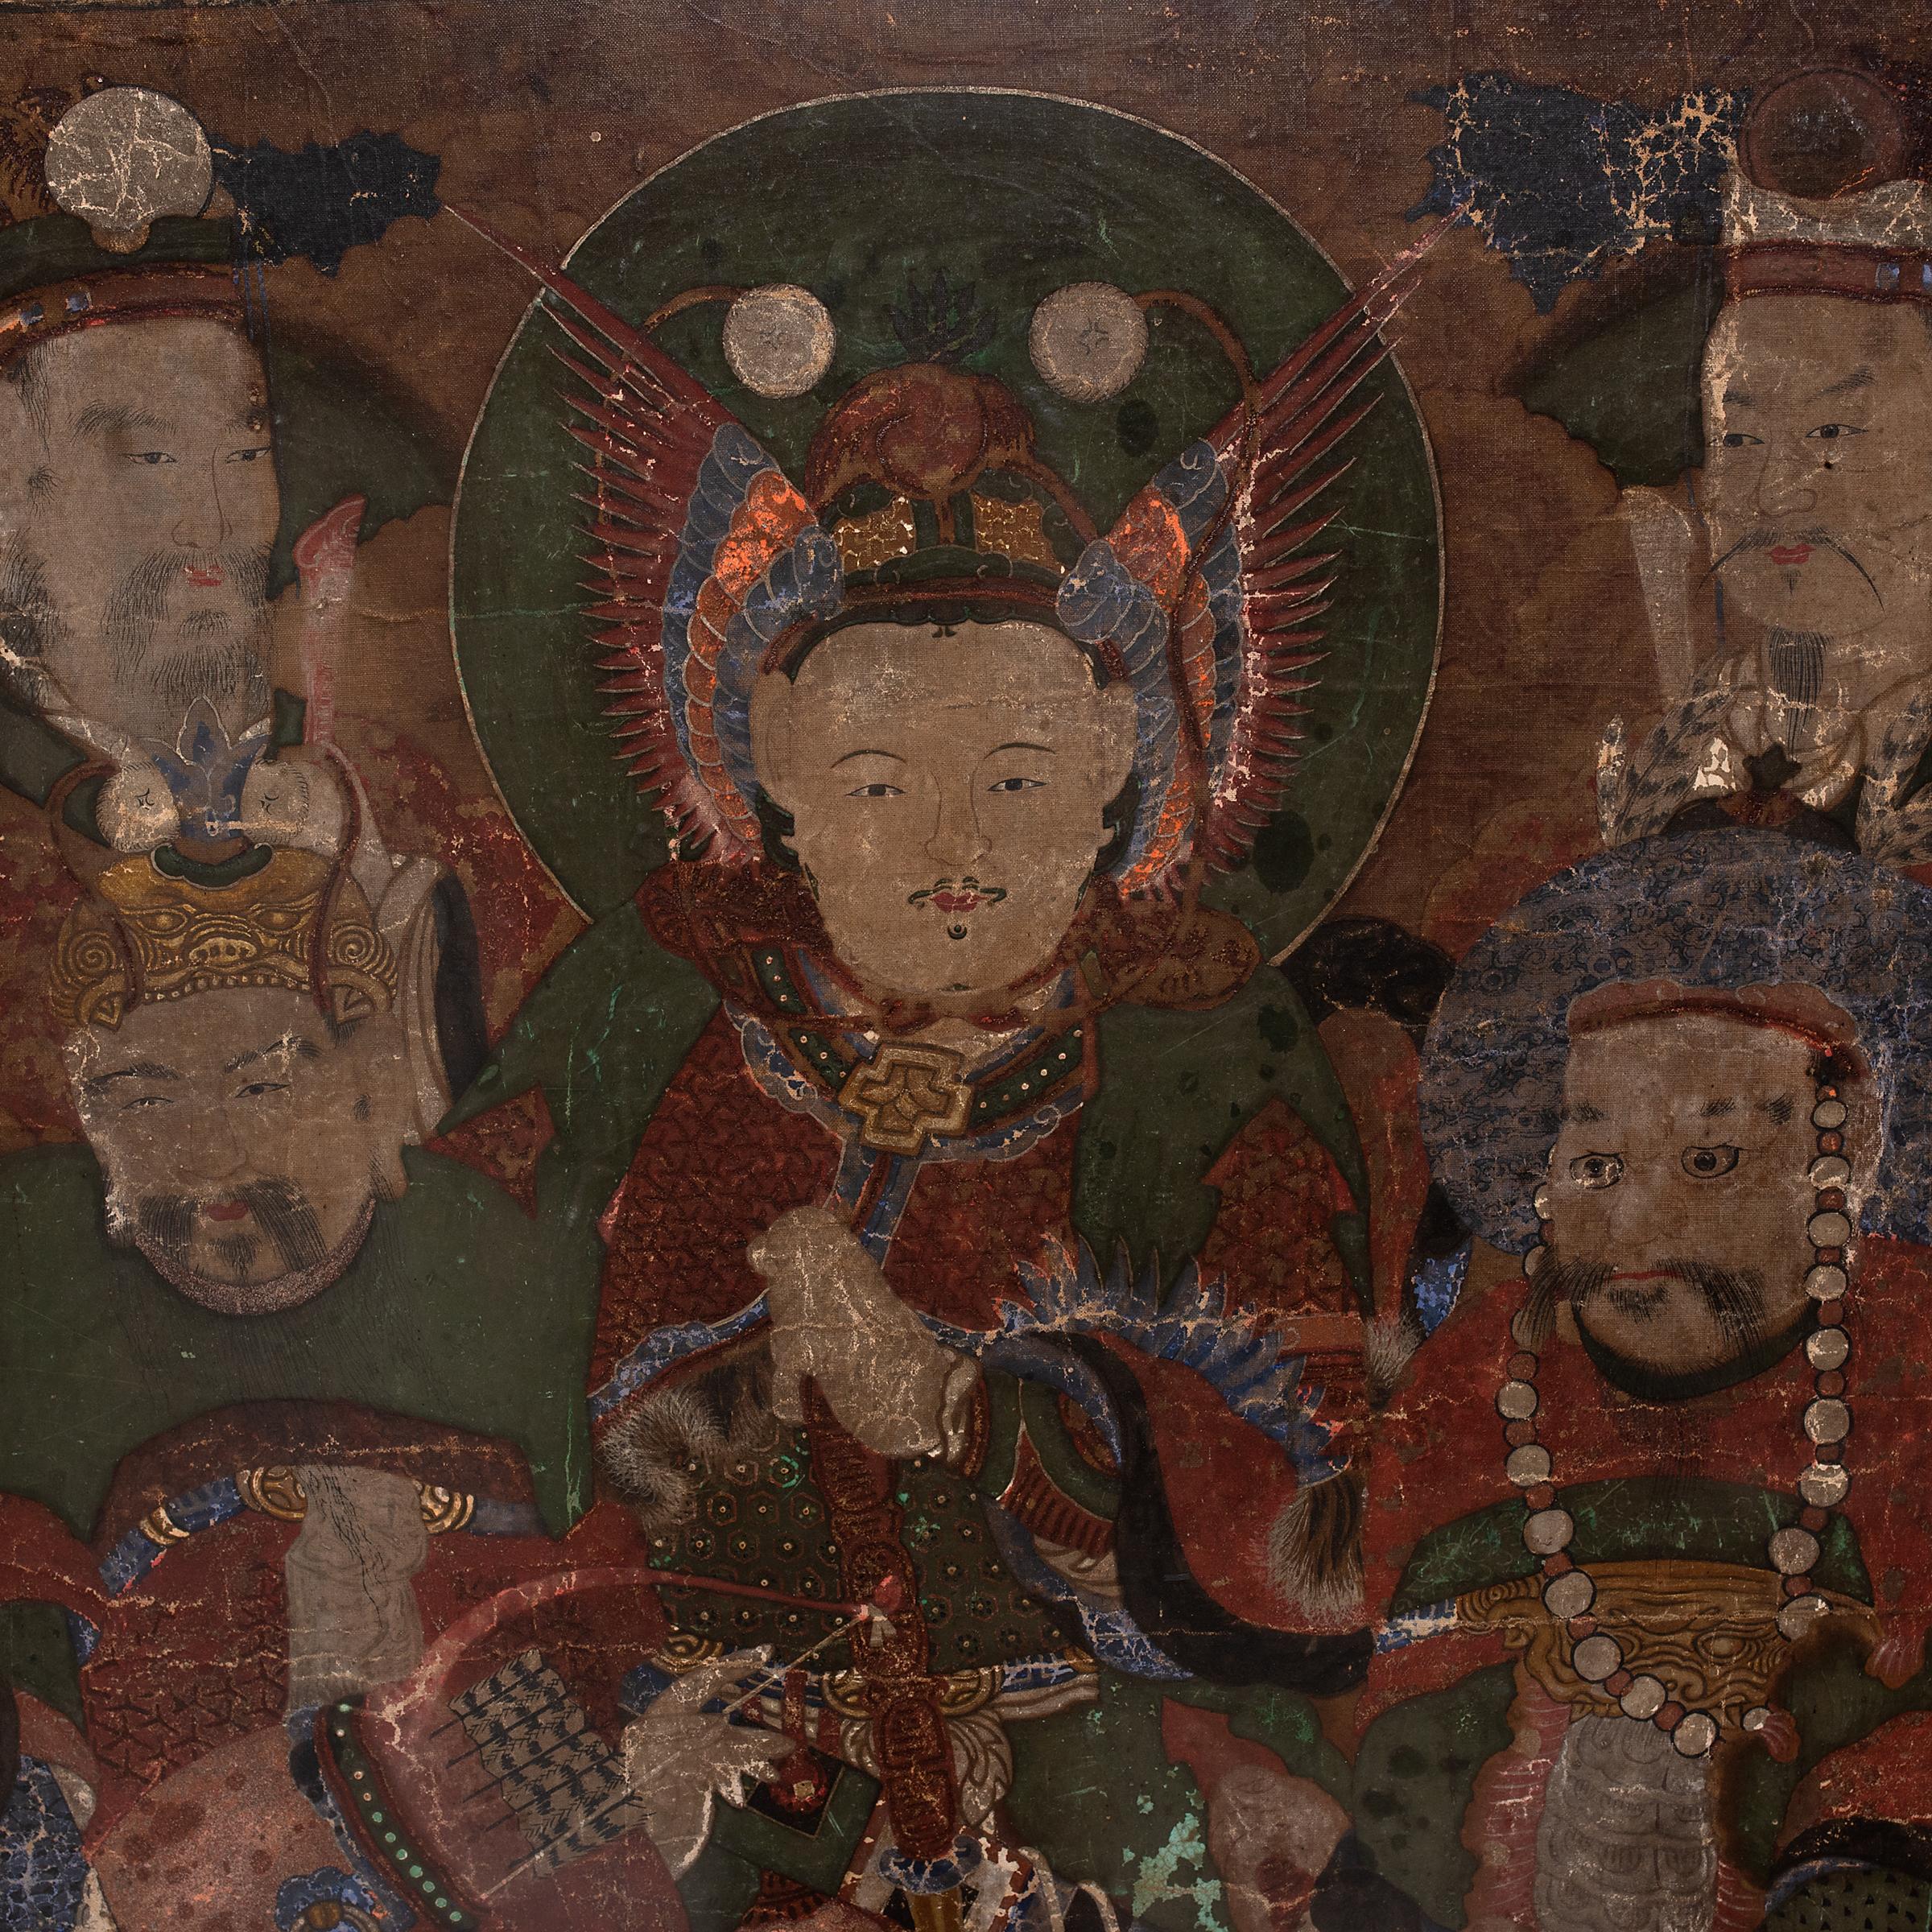 Korean Buddhist Guardian Mural Taenghwa Painting, c. 1800 - Black Figurative Painting by Unknown